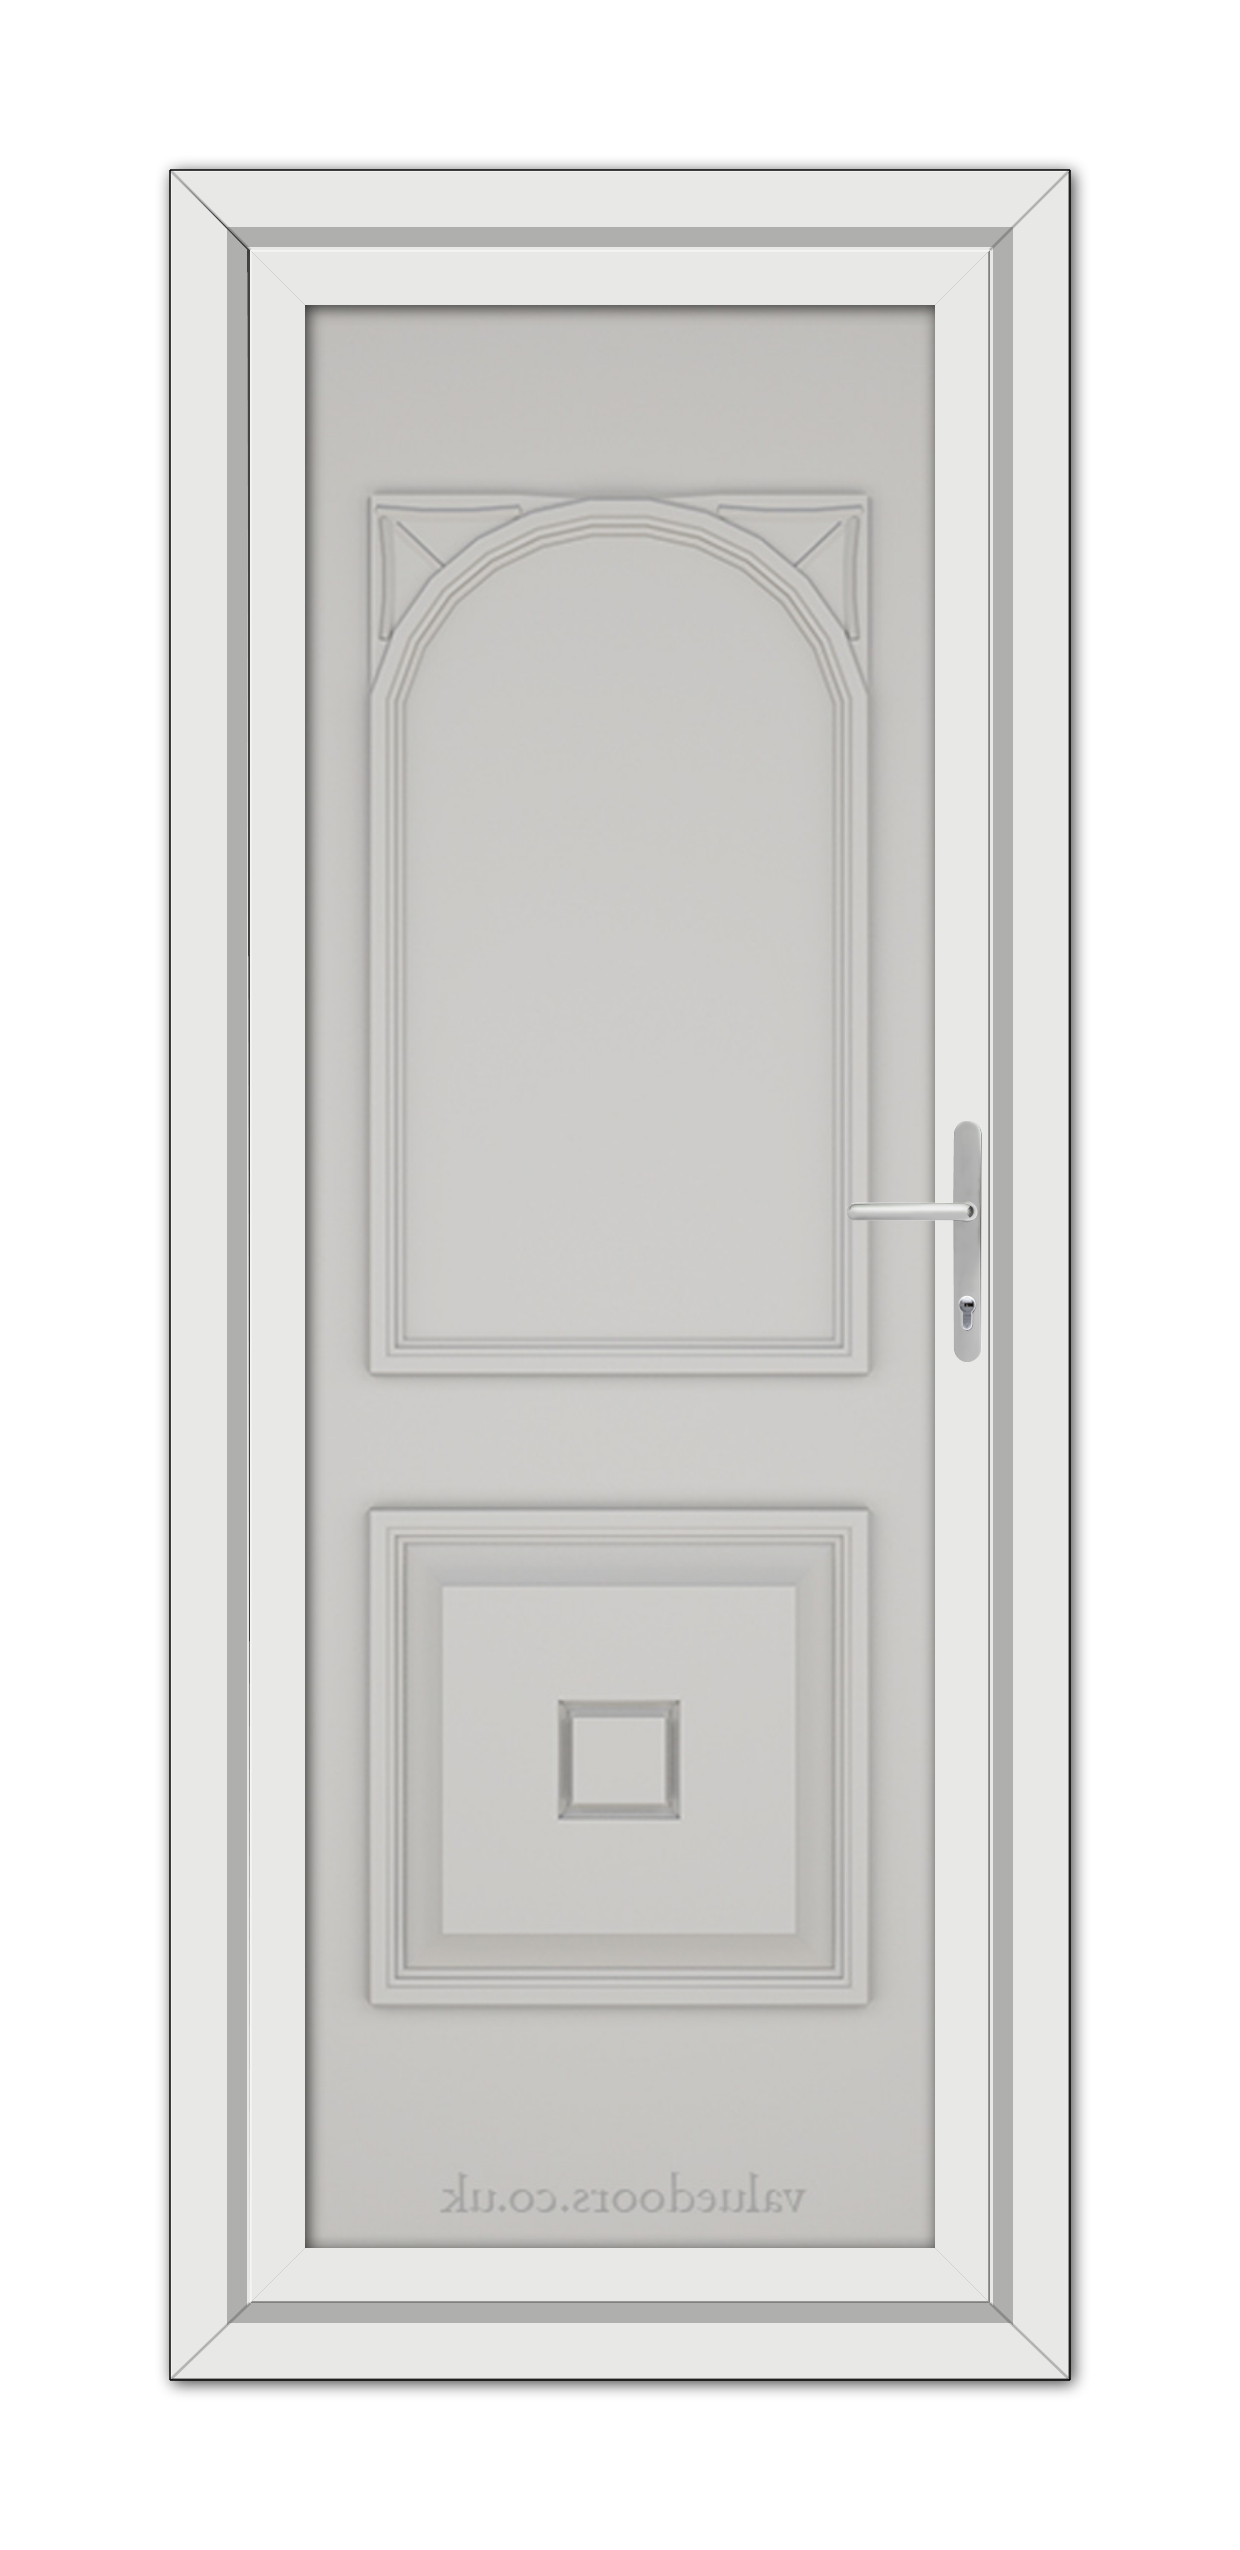 Silver Grey Reims Solid uPVC Door with a square design.